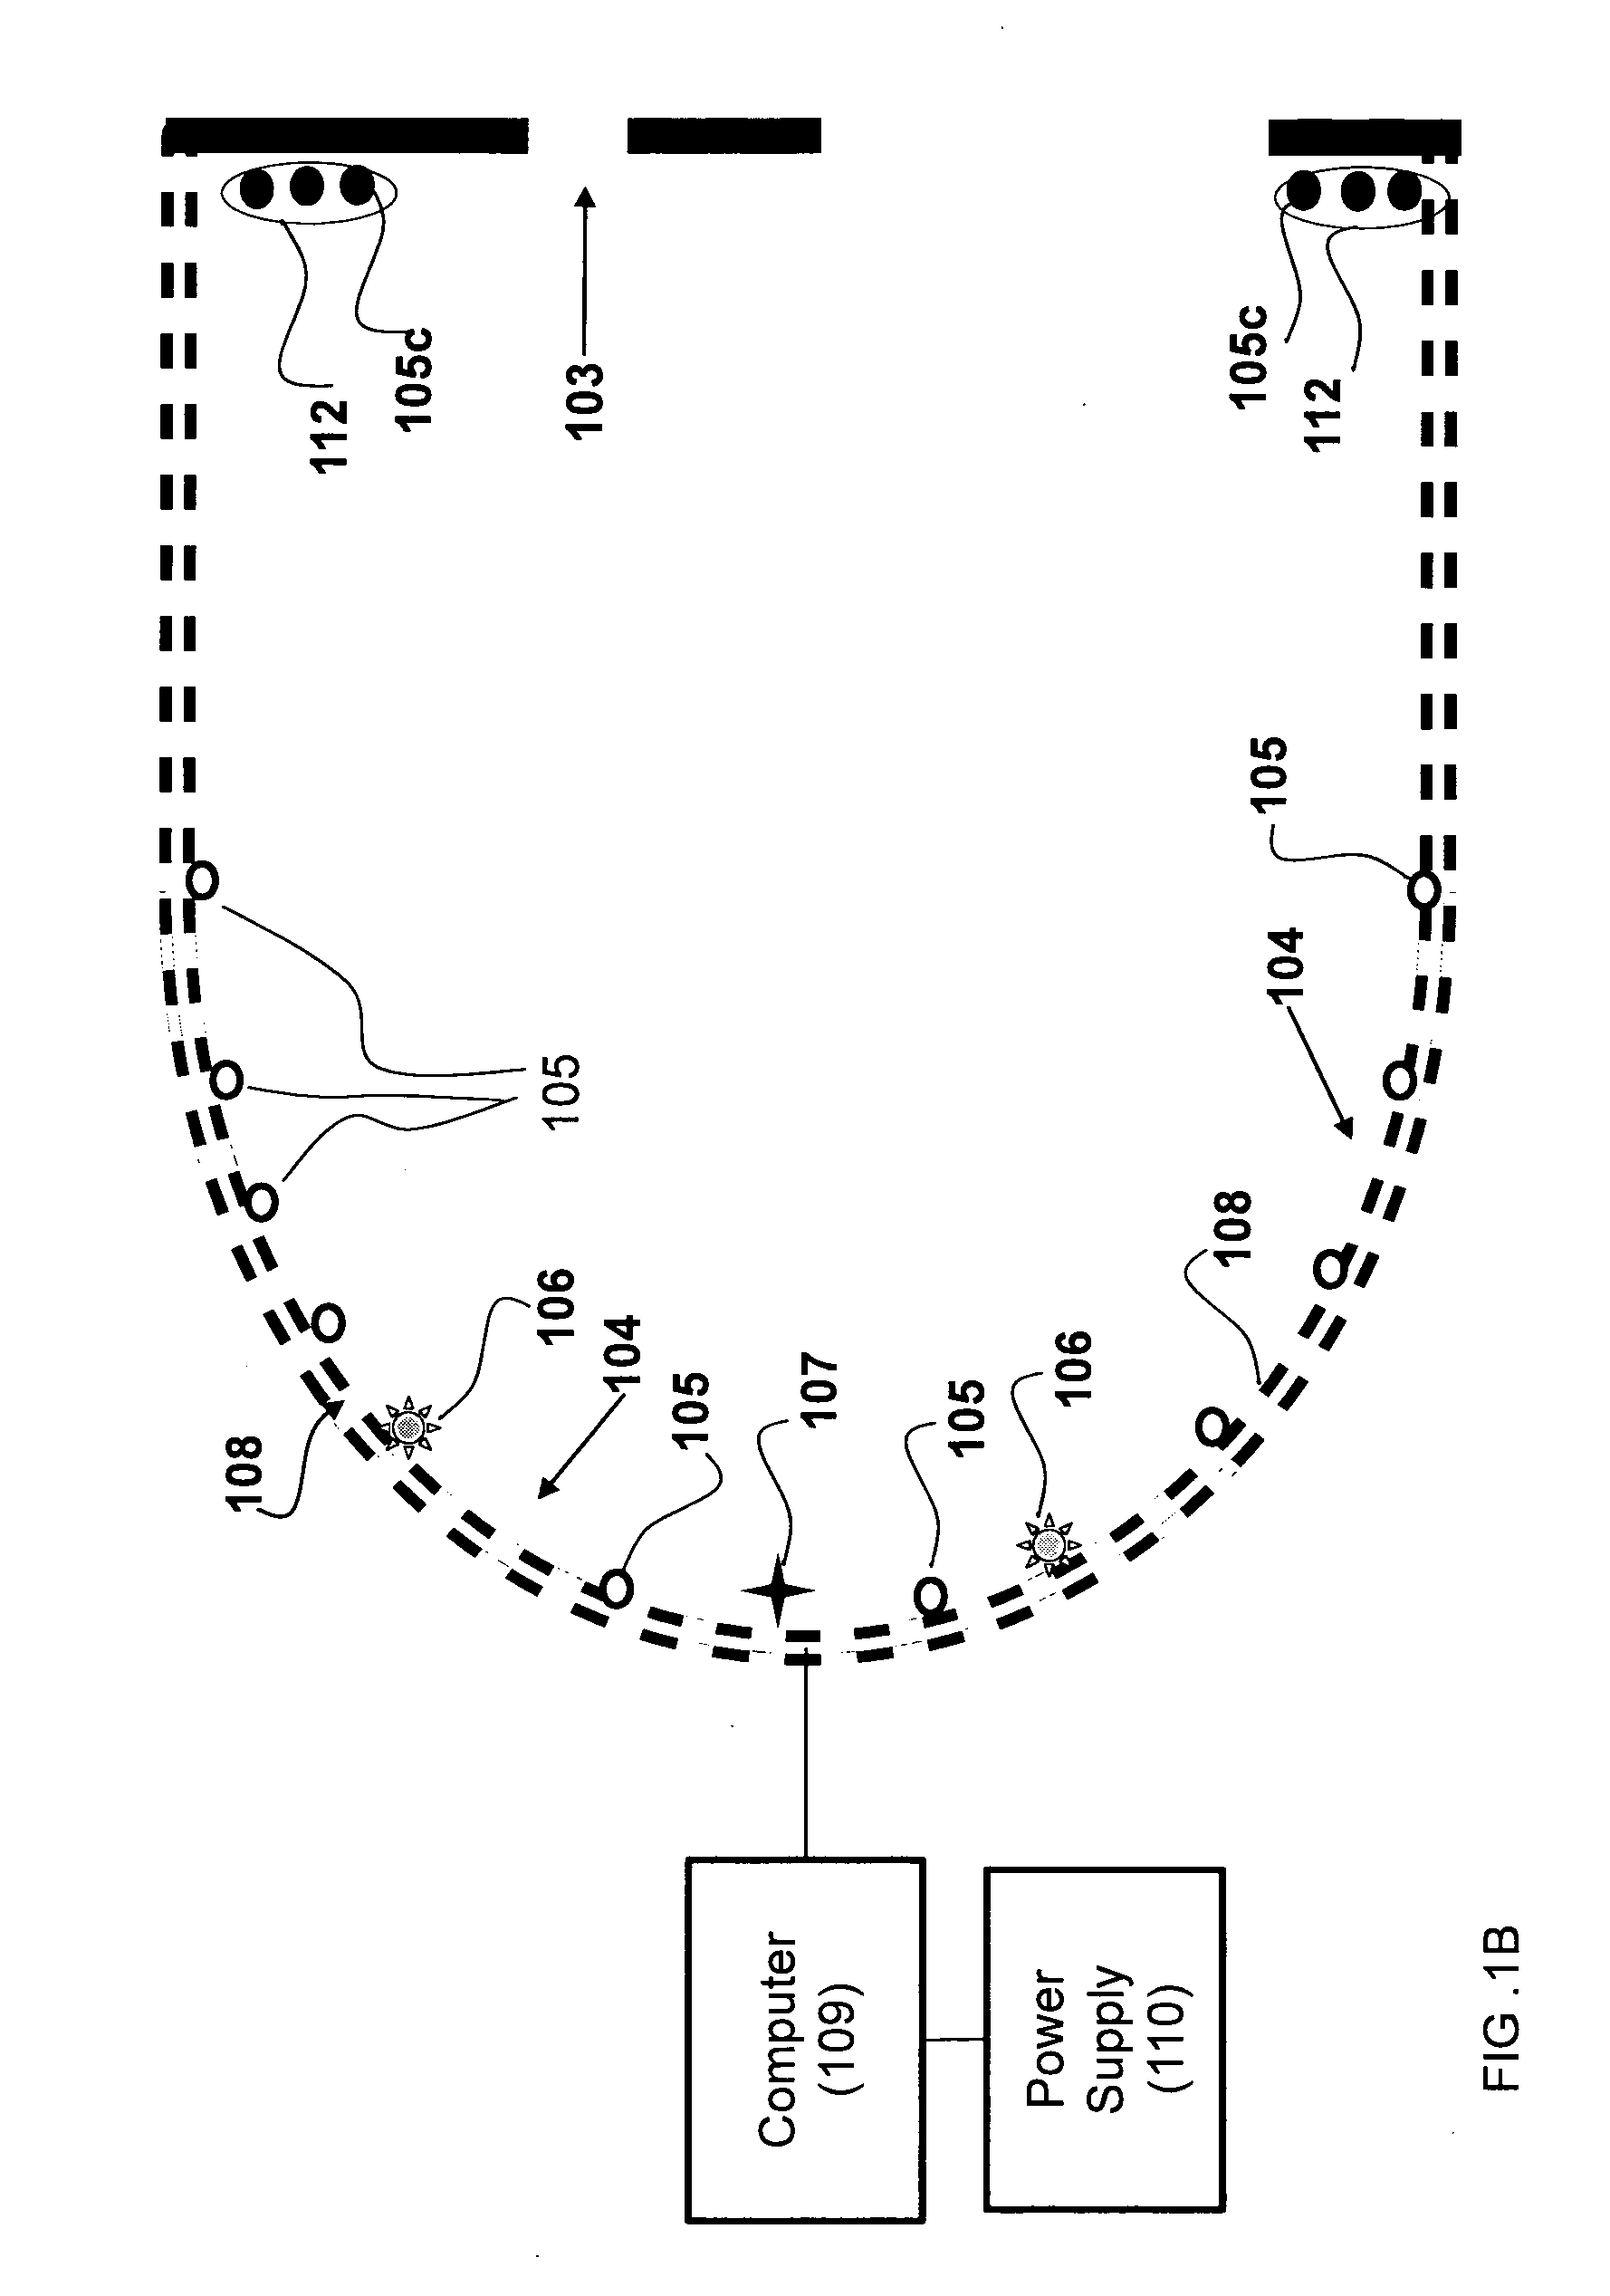 System And Method For Objective Chromatic Perimetry Analysis Using Pupillometer